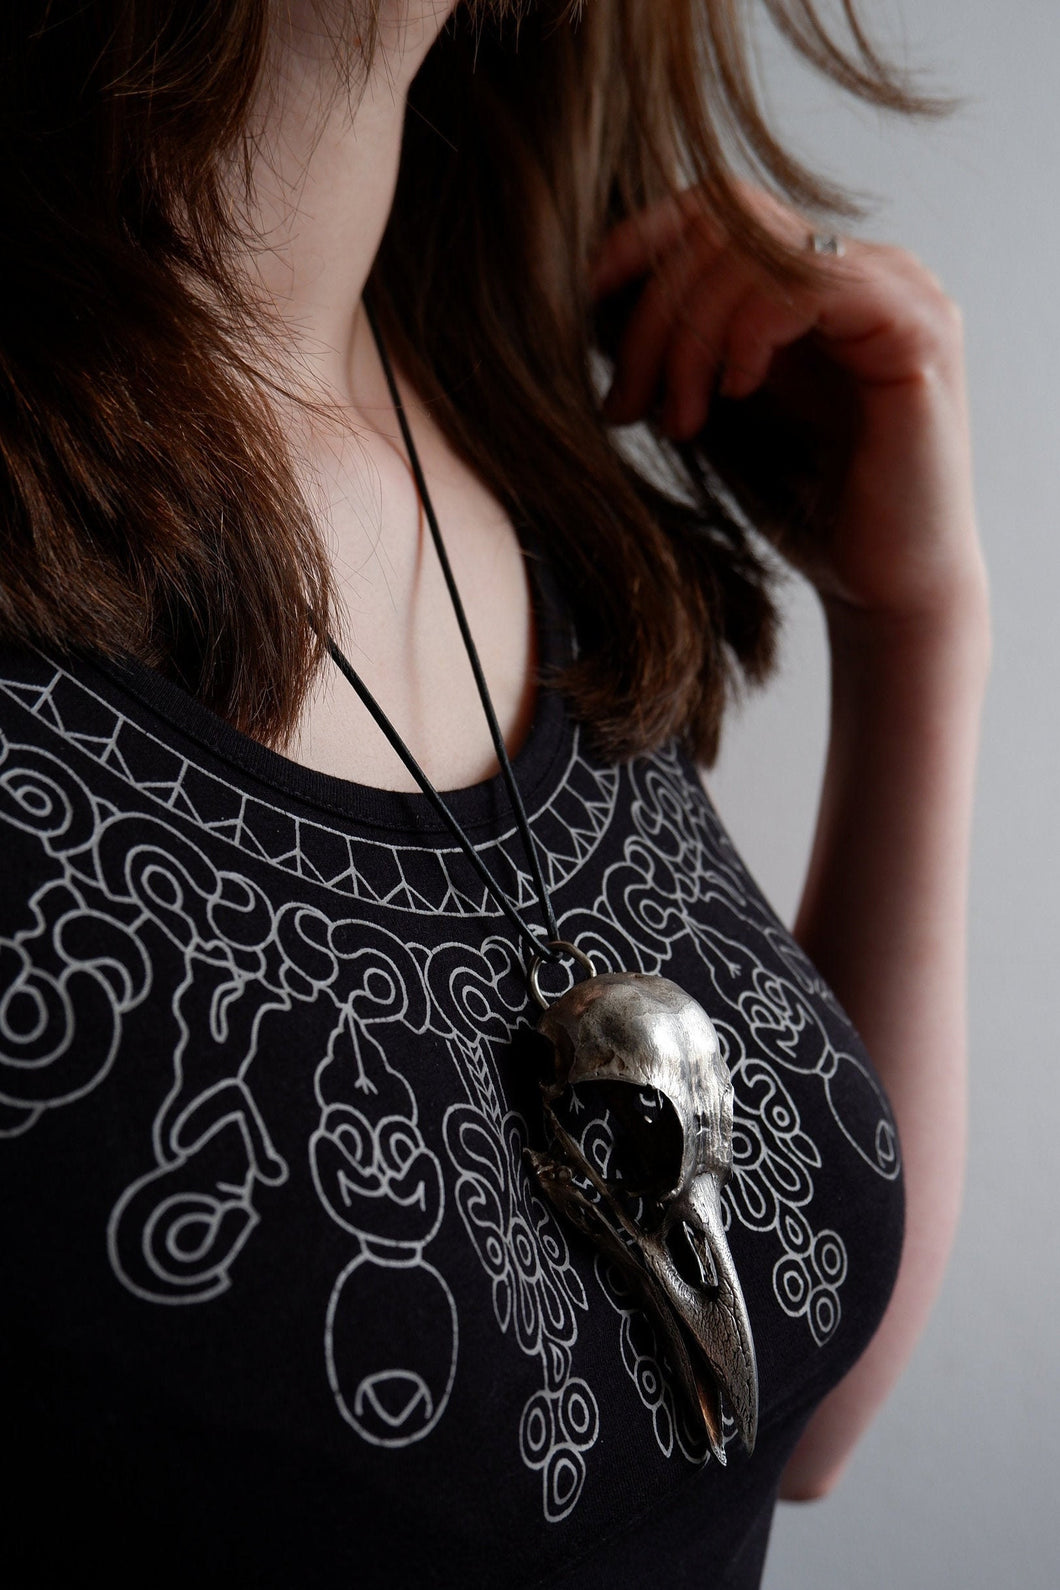 Heavy Sterling Silver or Bronze Crow Skull. Cast from a Real Skull!